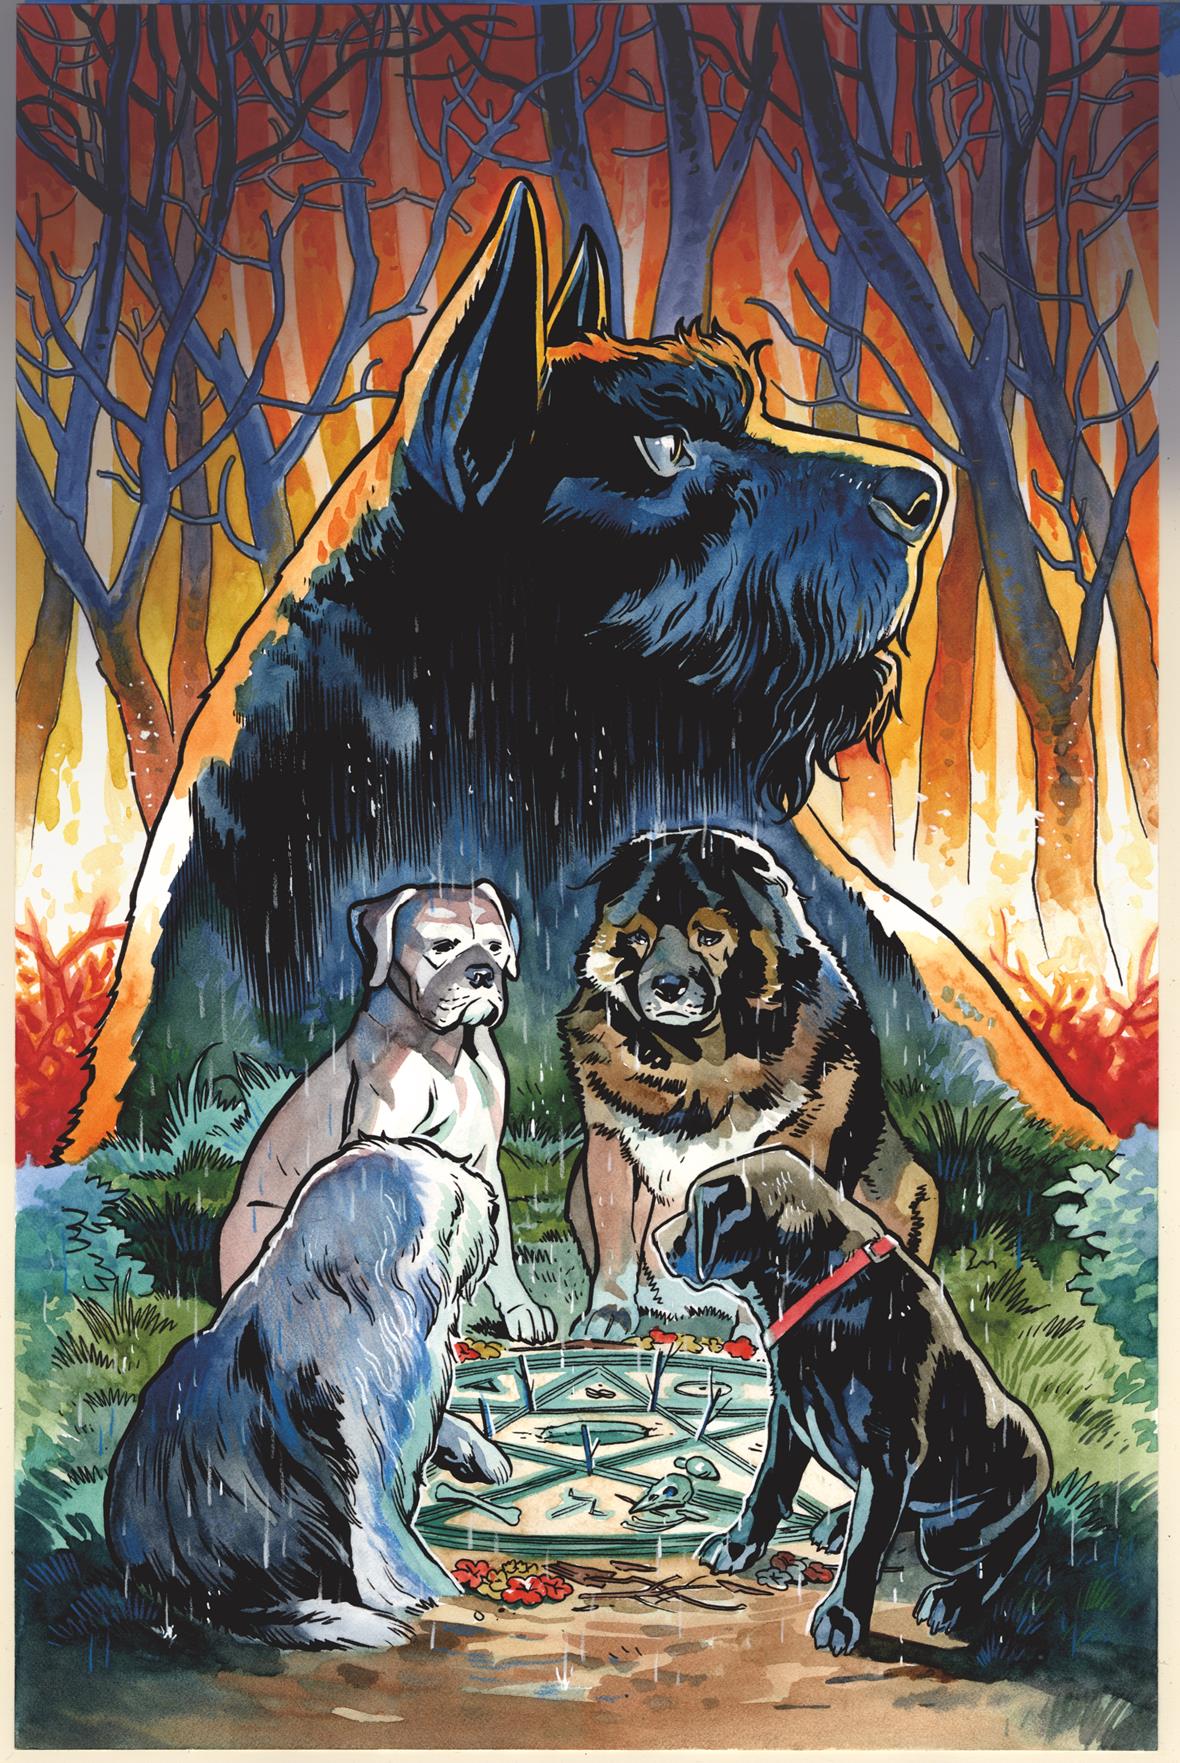 Beasts of Burden: Wise Dogs and Eldritch Men